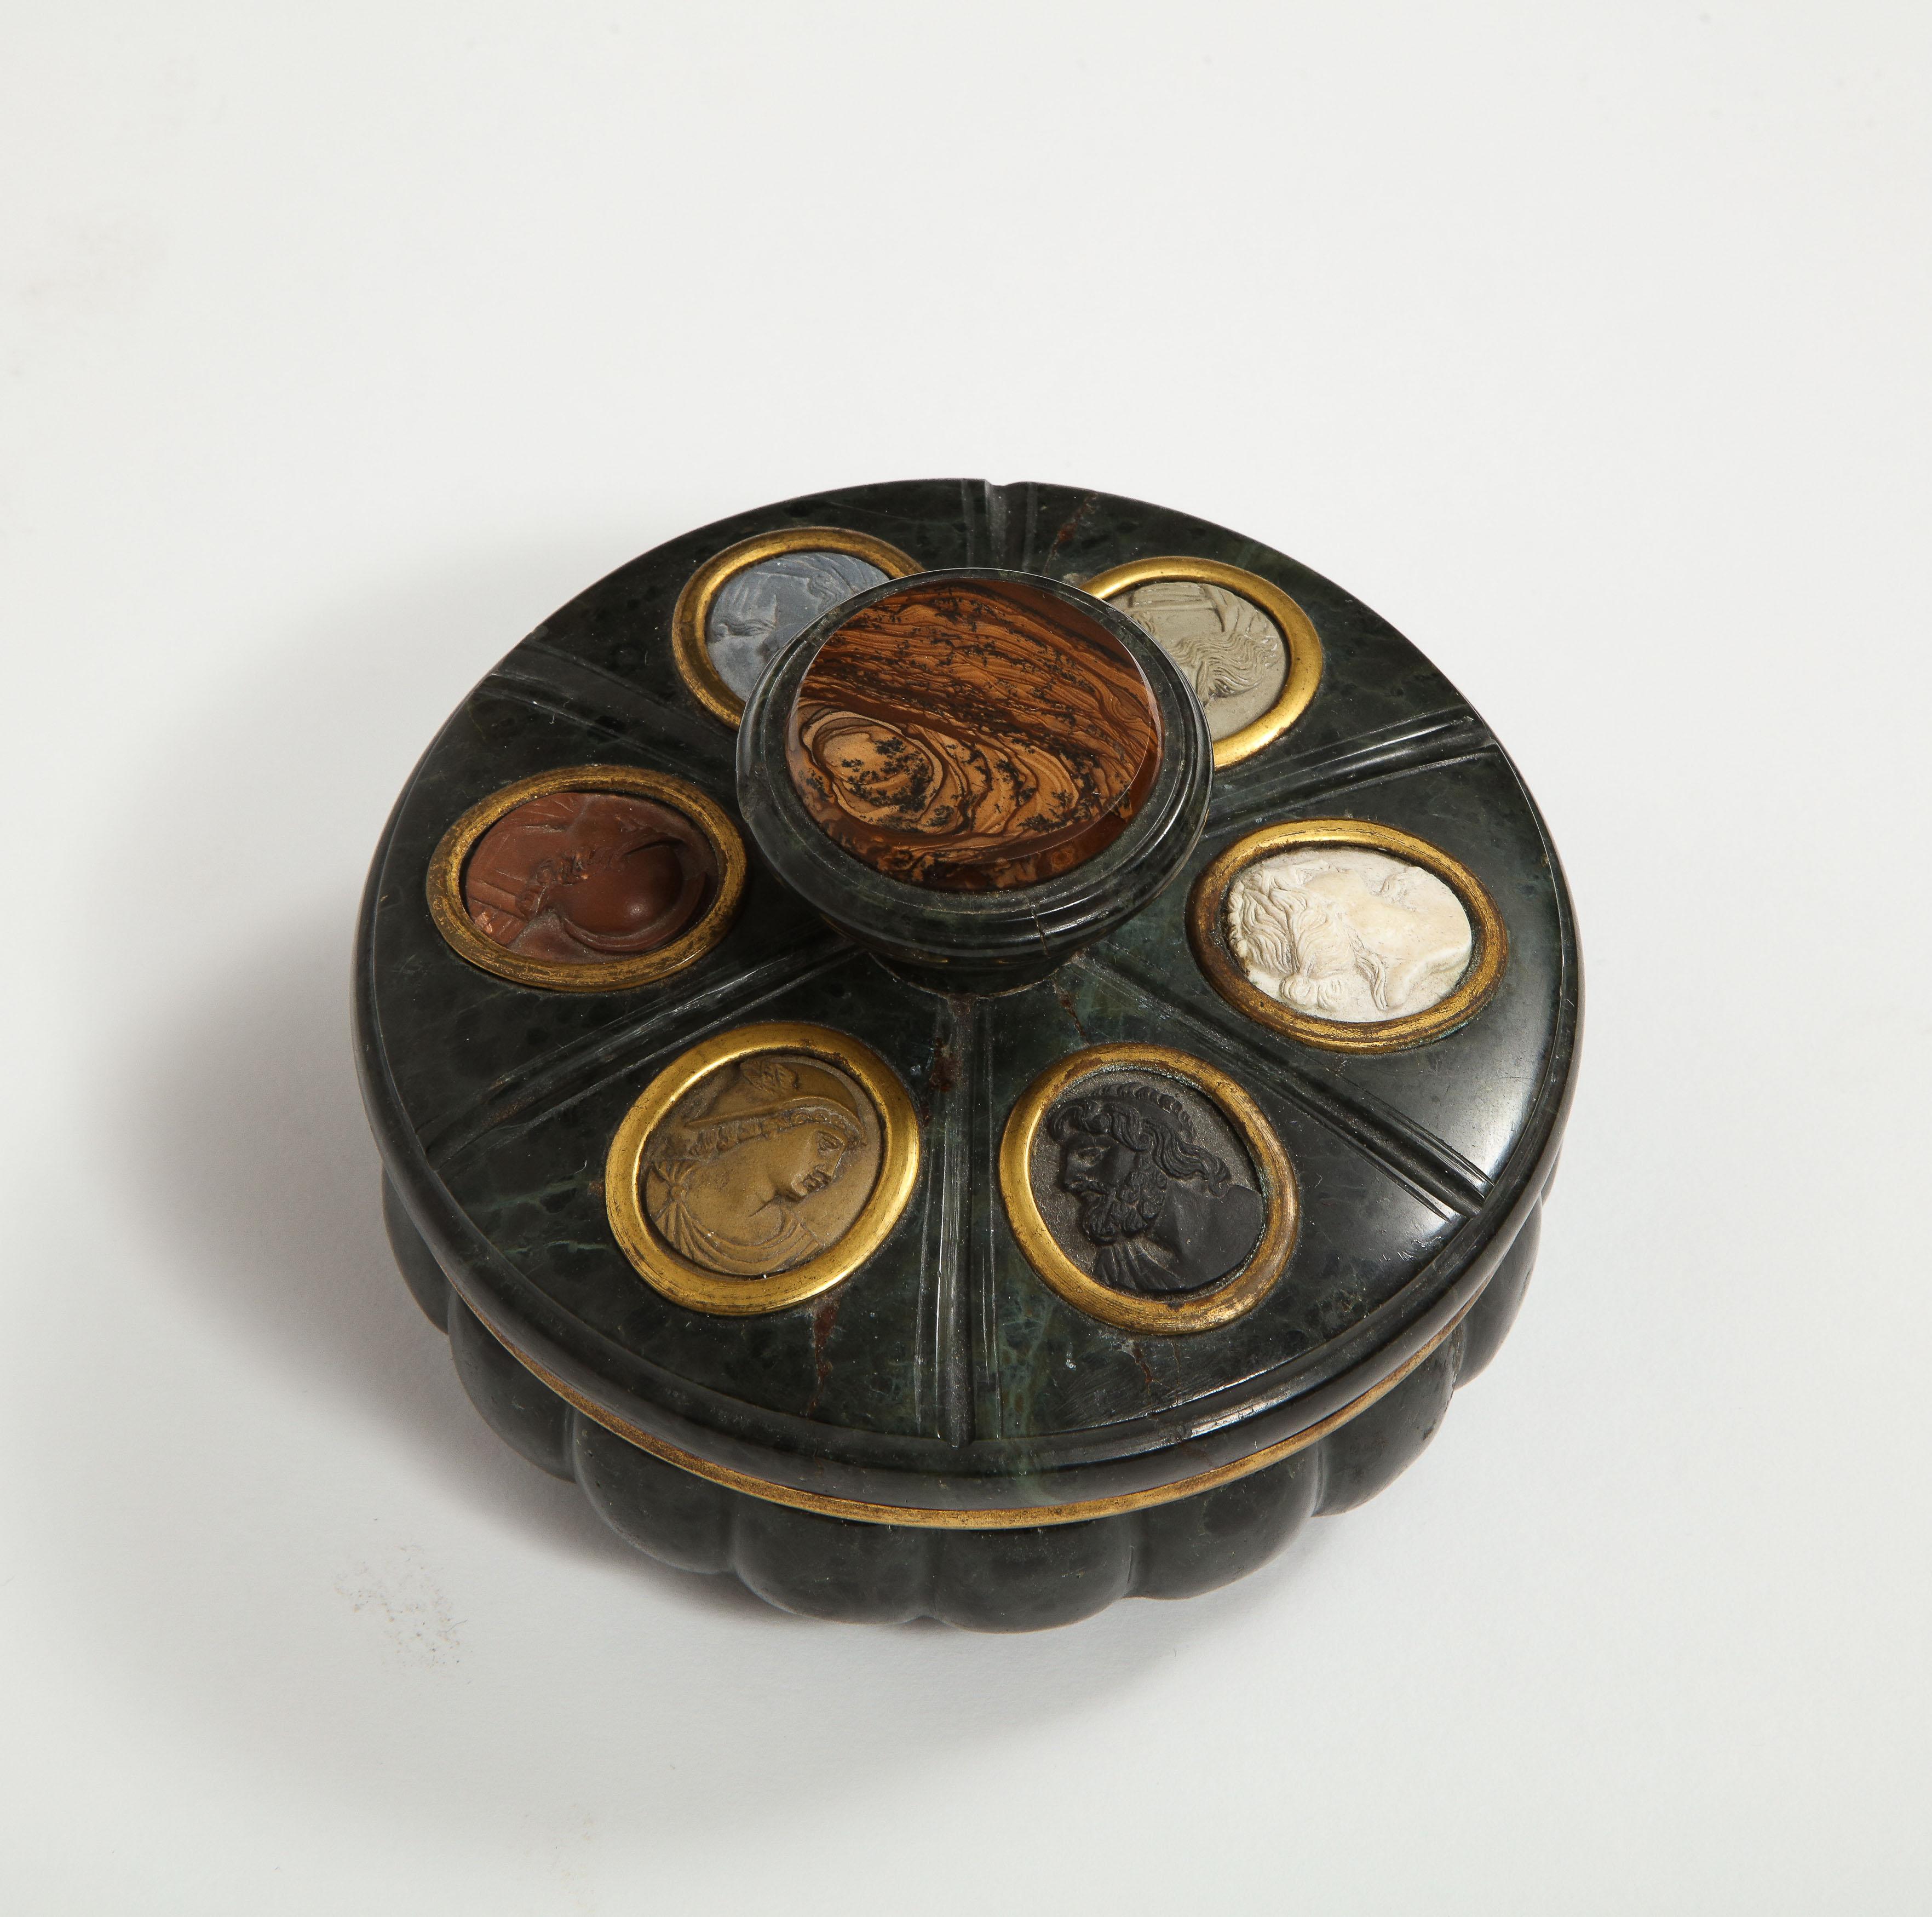 An antique Italian Grand Tour green Serpentine marble Inkwell, Naples, Italy, circa 1860.

A round marble inkwell, the lid exterior set with lava cameos of Classical figures, the interior with a watercolor scene.

Very nice and collectible